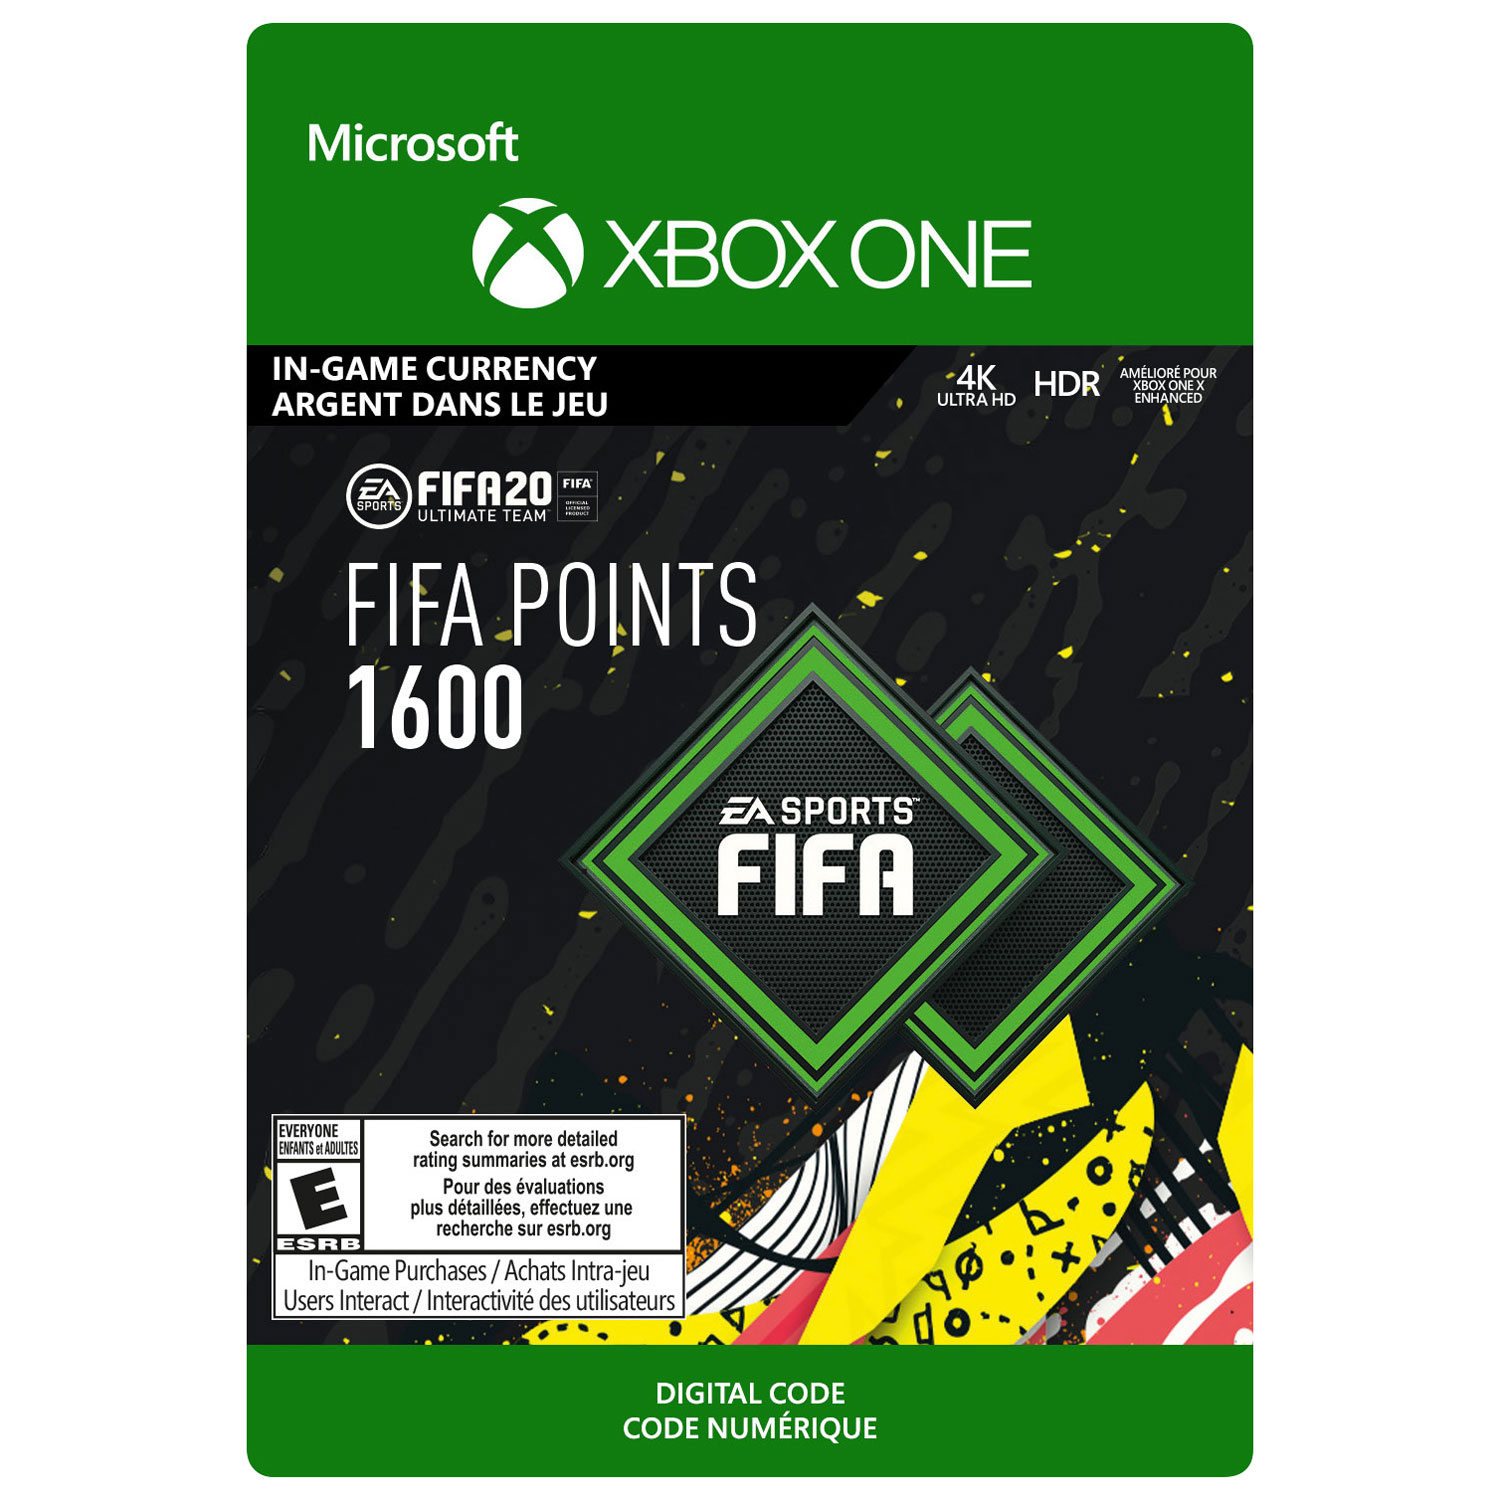 FIFA 20 1600 Ultimate Team FIFA Points (Xbox One) - Digital Download